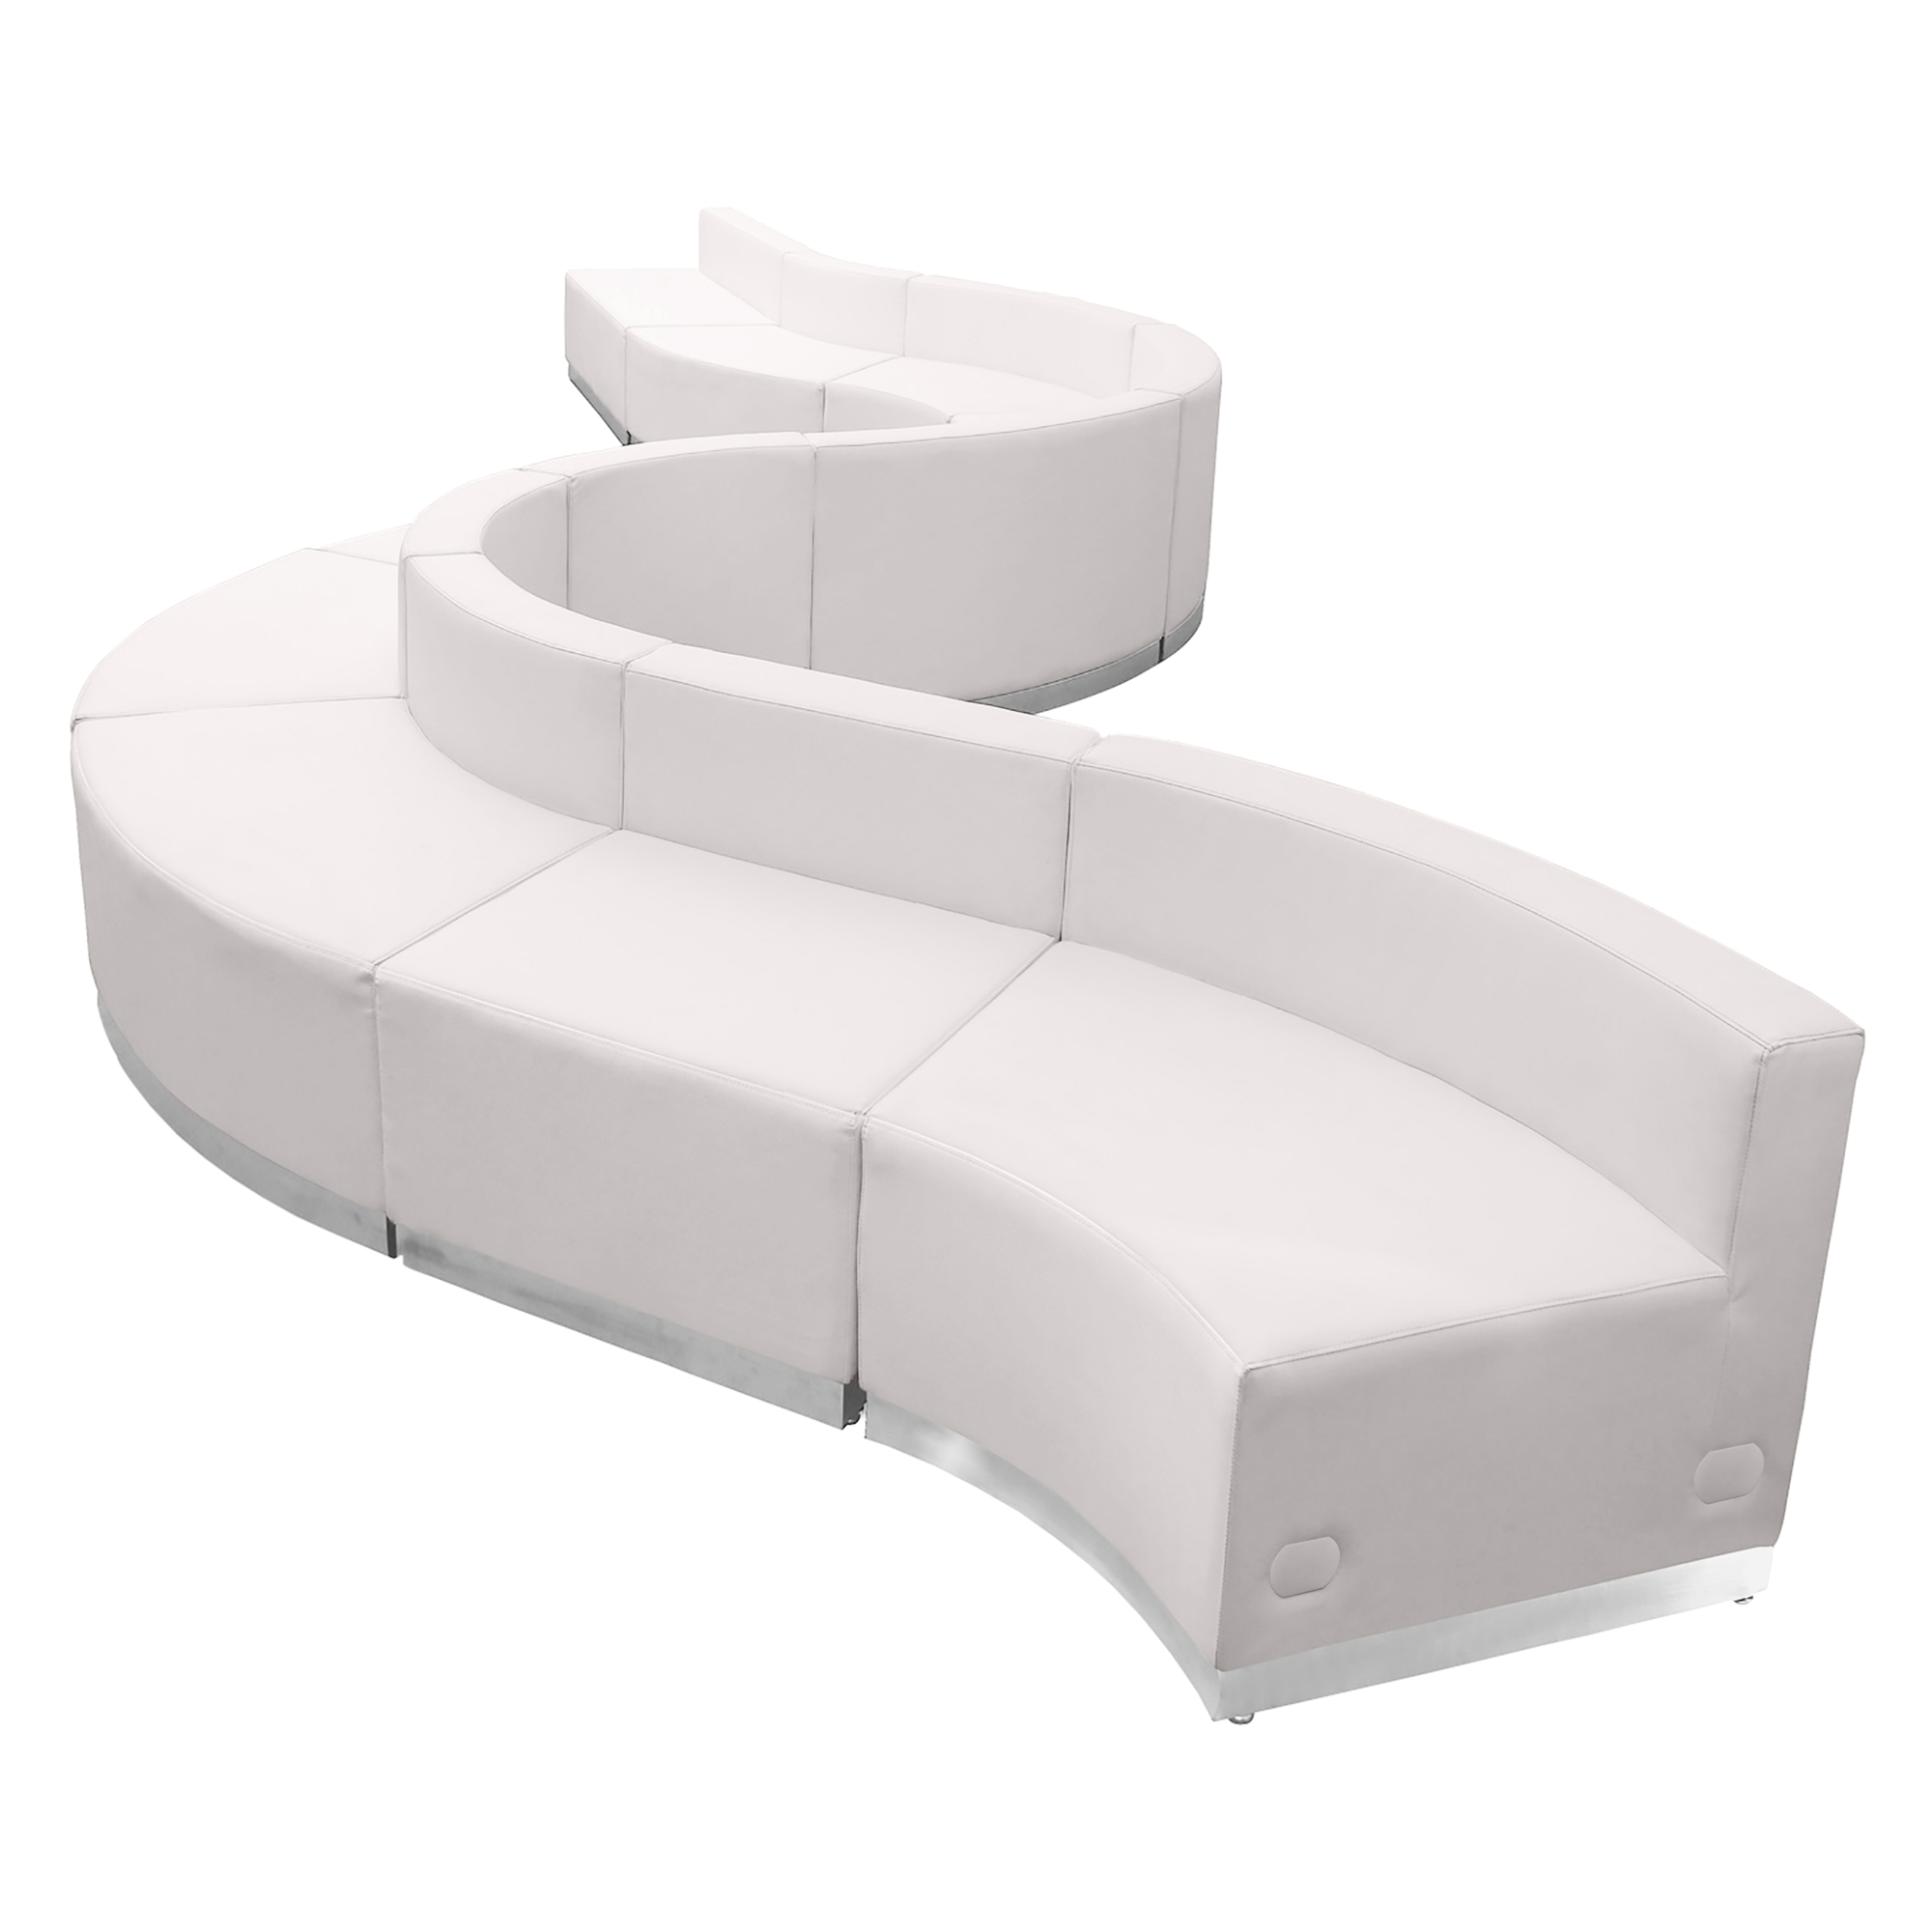 Flash Furniture, 10 PC White LeatherSoft Reception Configuration, Primary Color White, Included (qty.) 10, Model ZB803400SWH